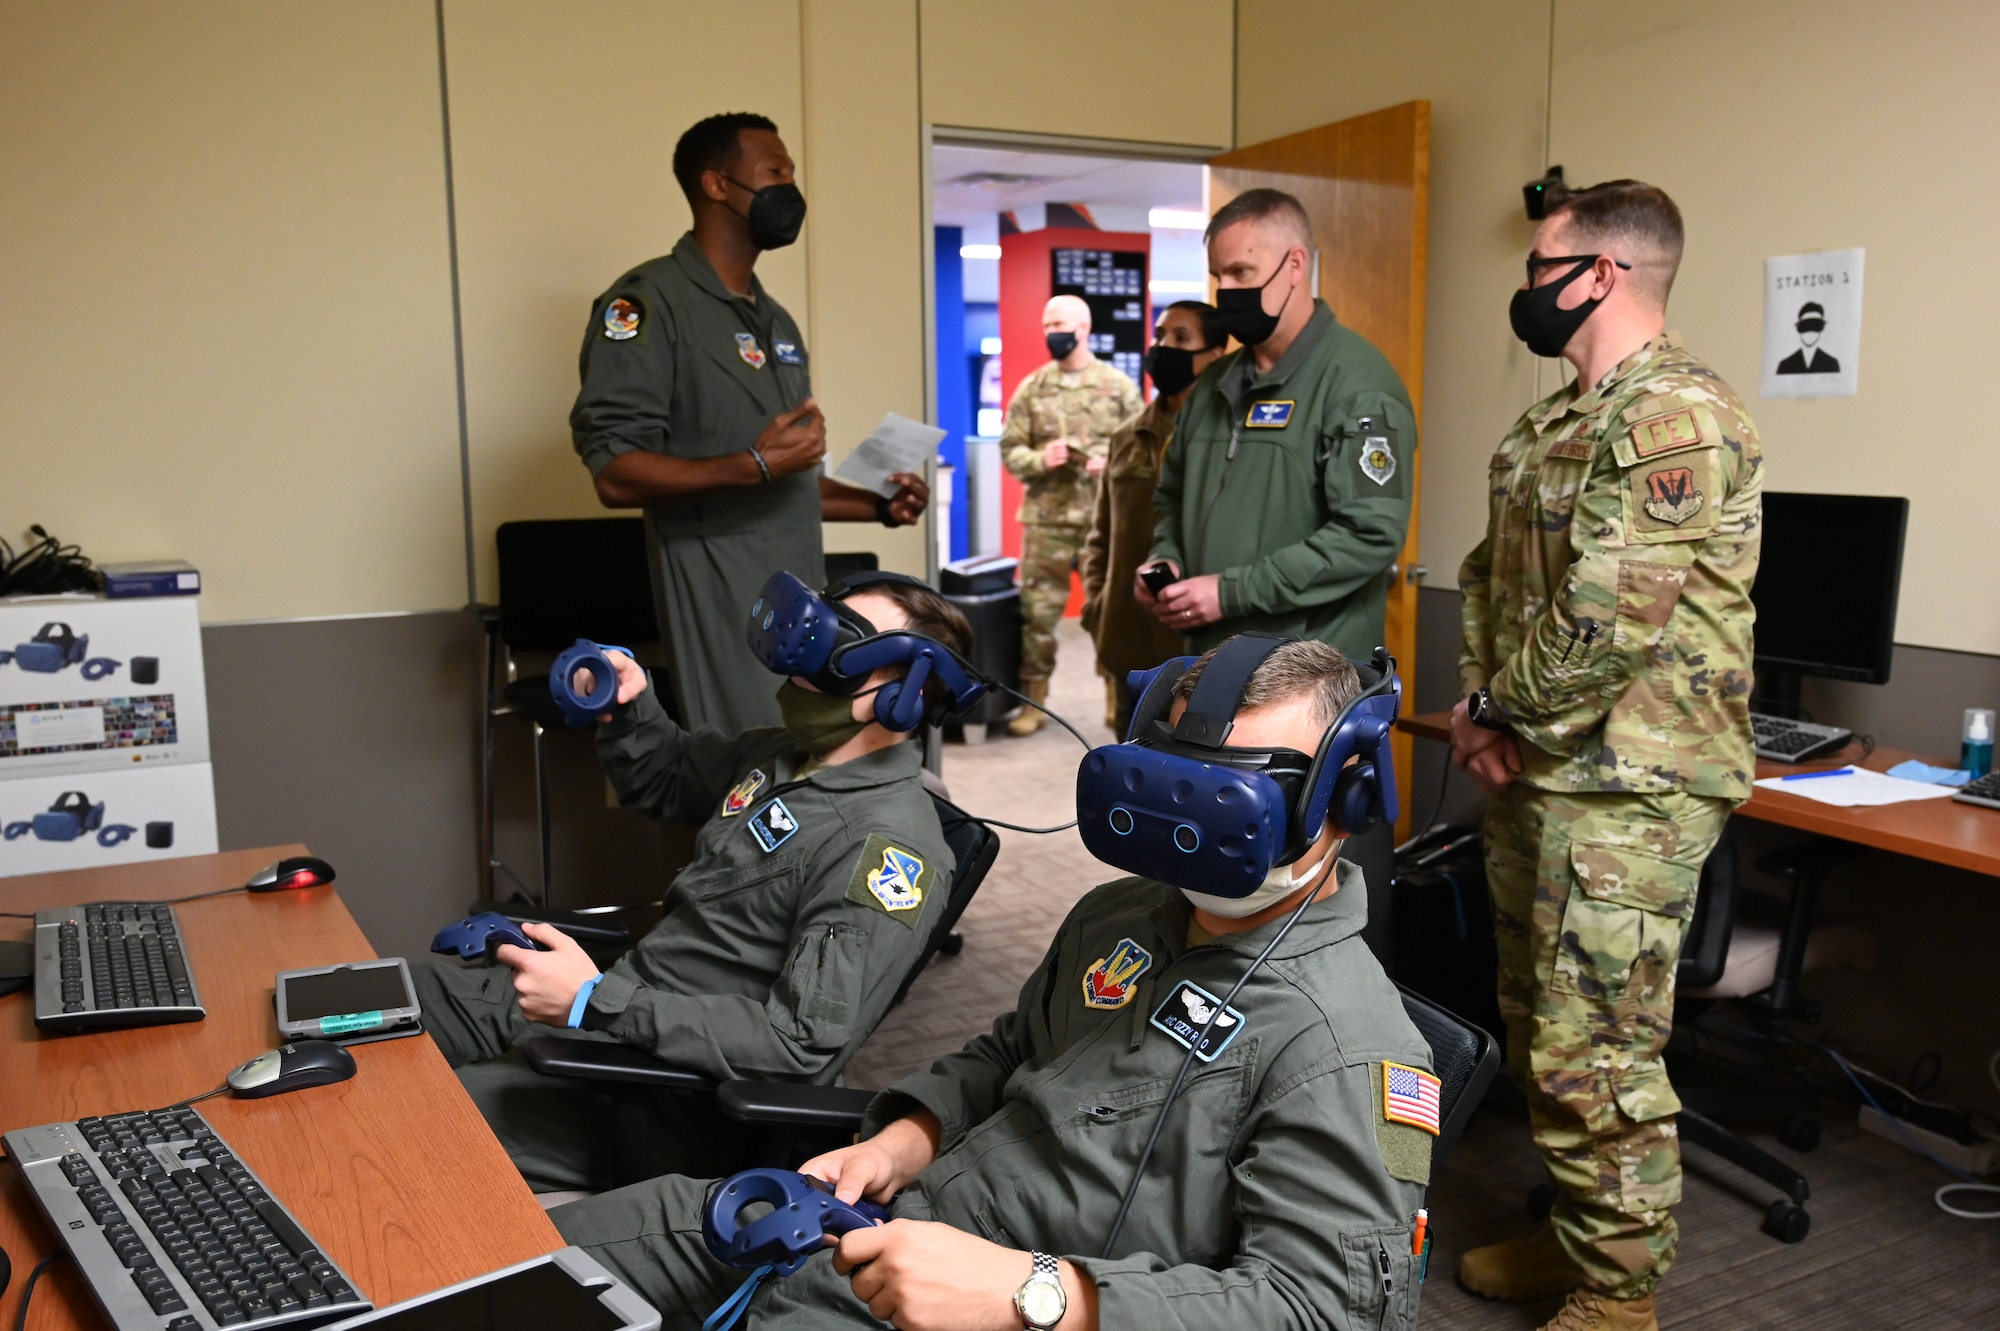 Two individuals demonstrating virtual reality system